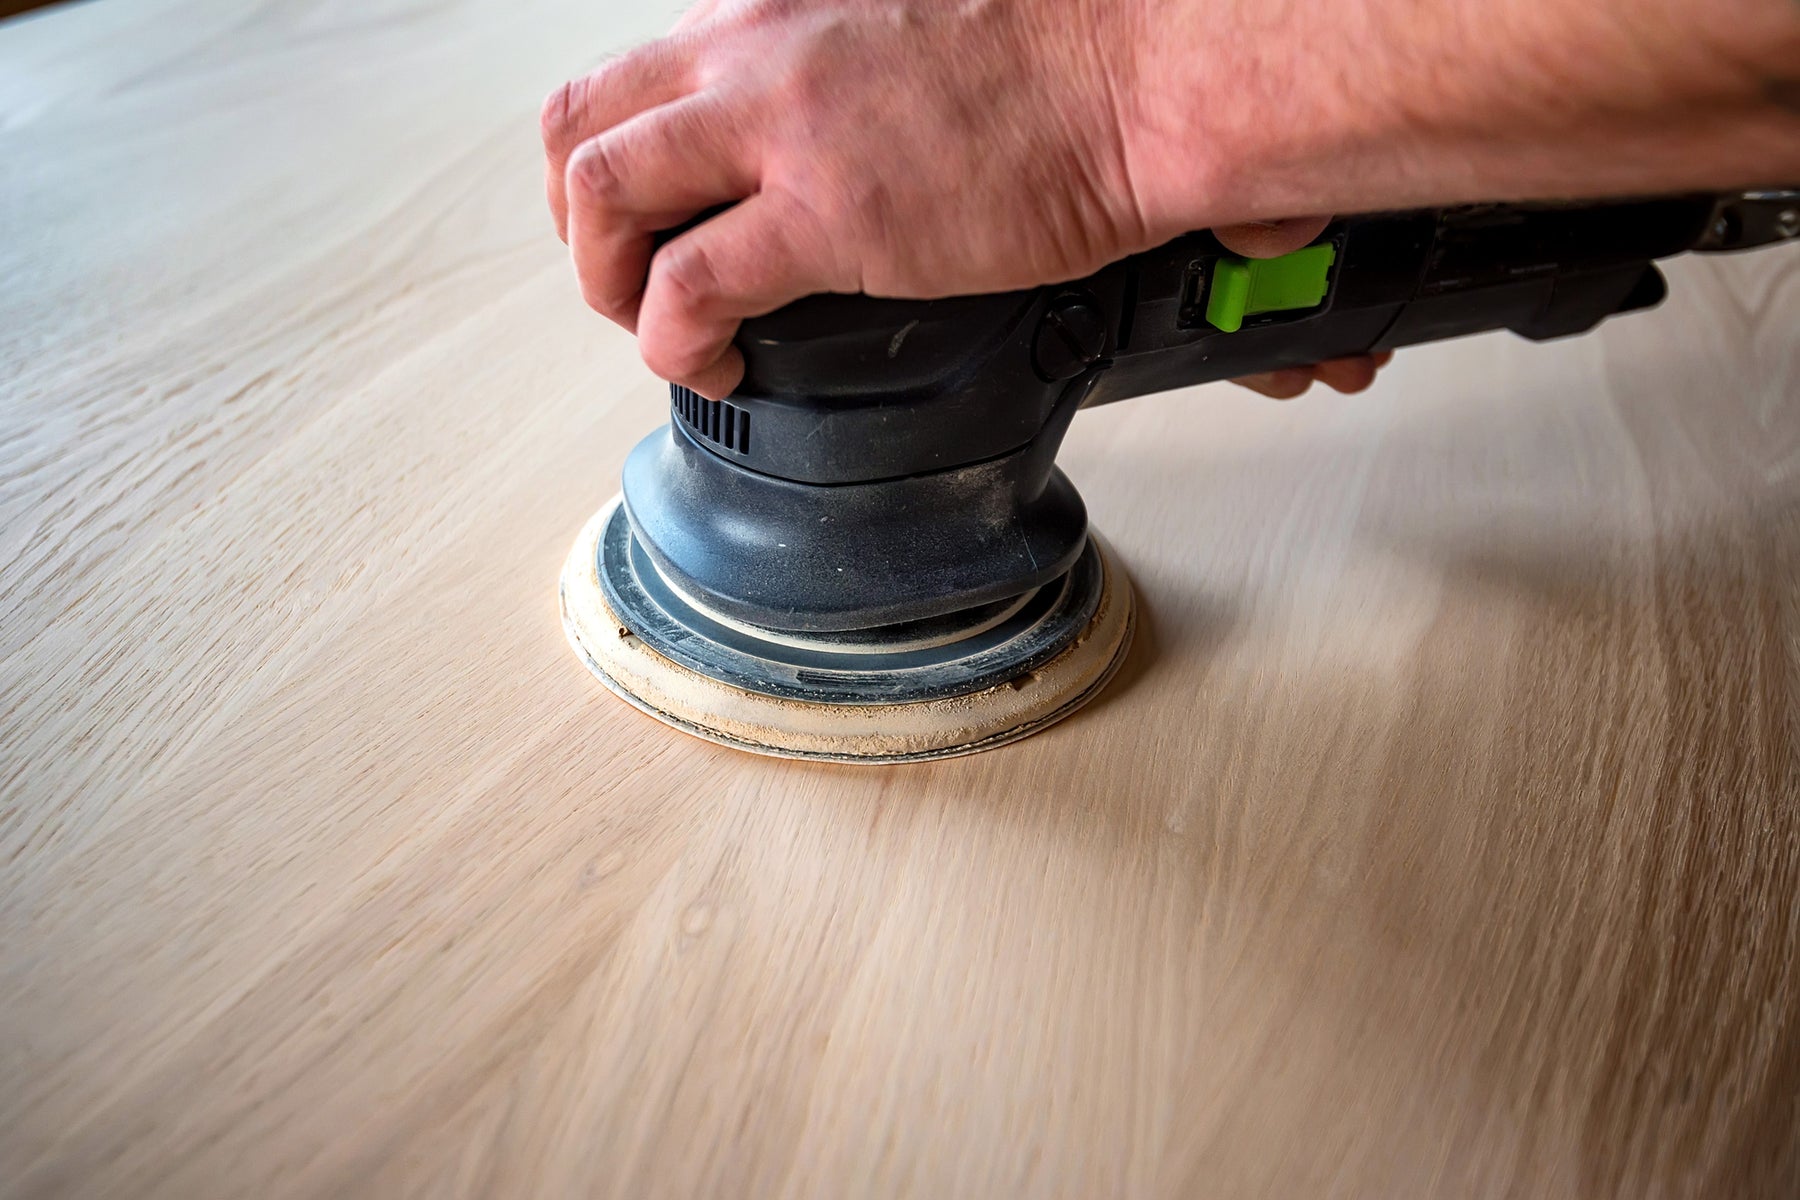 What sanding disc is best?